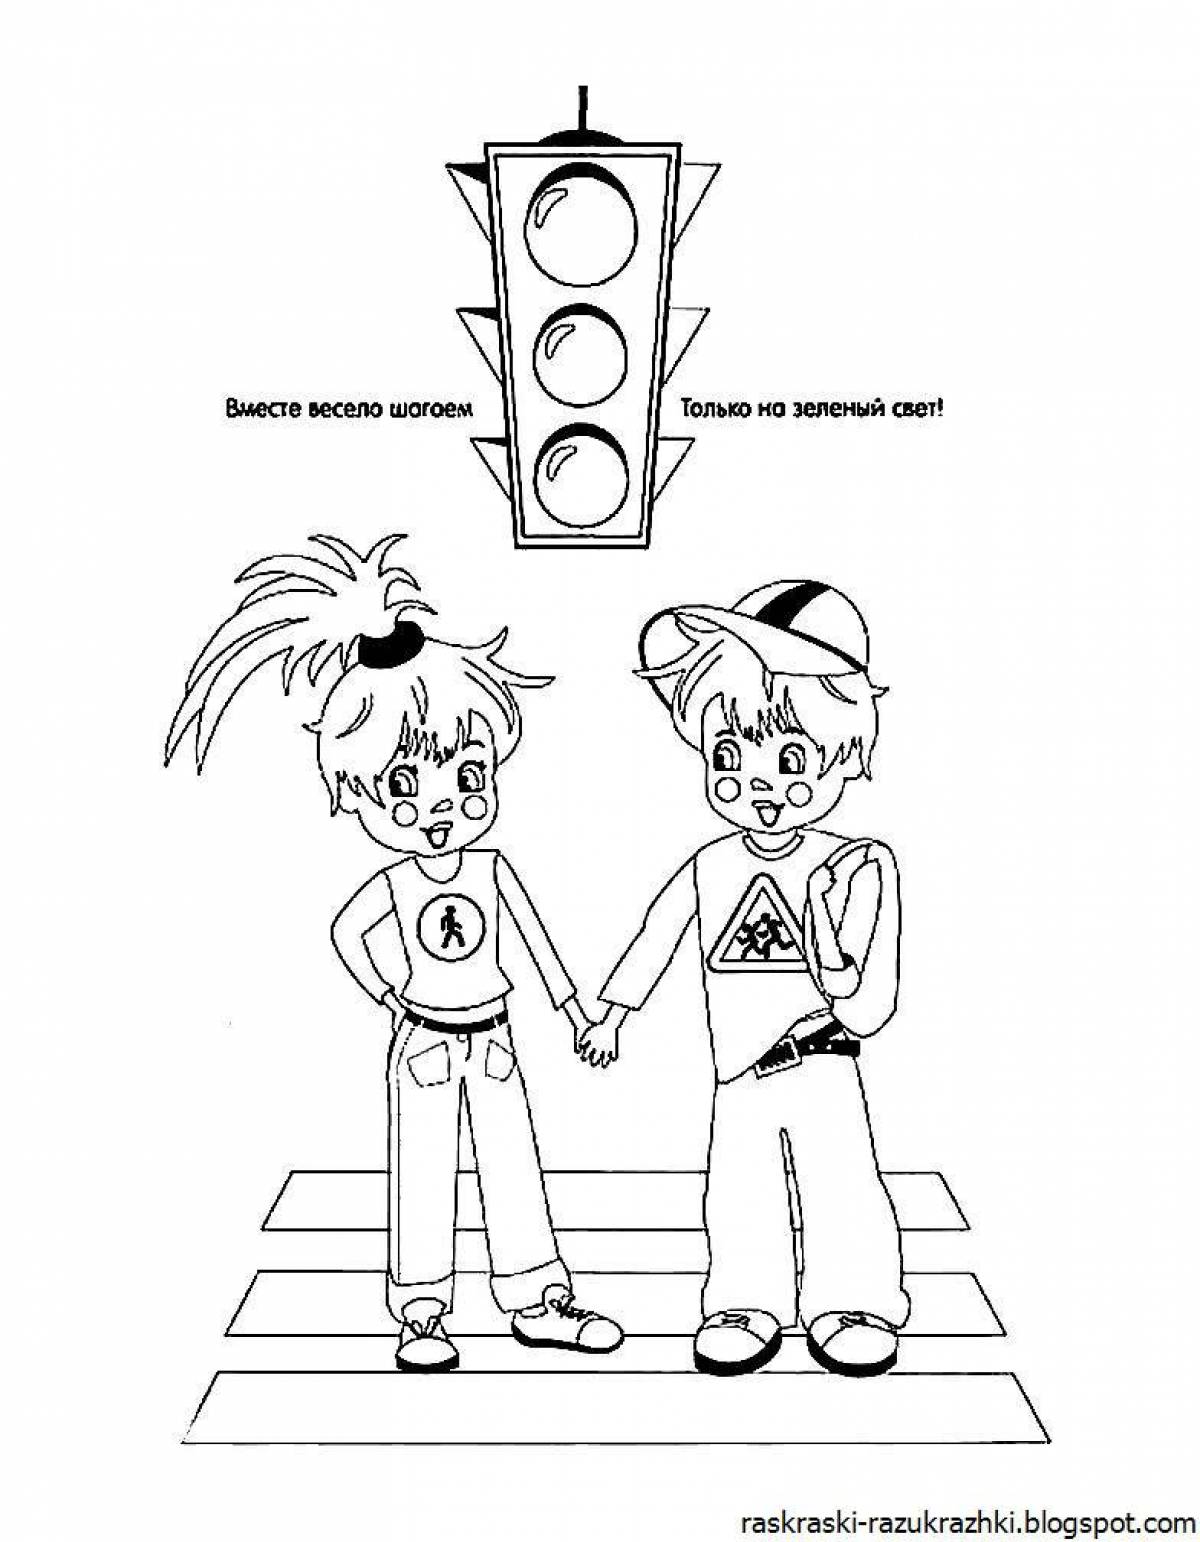 Fascinating traffic rules coloring page for students